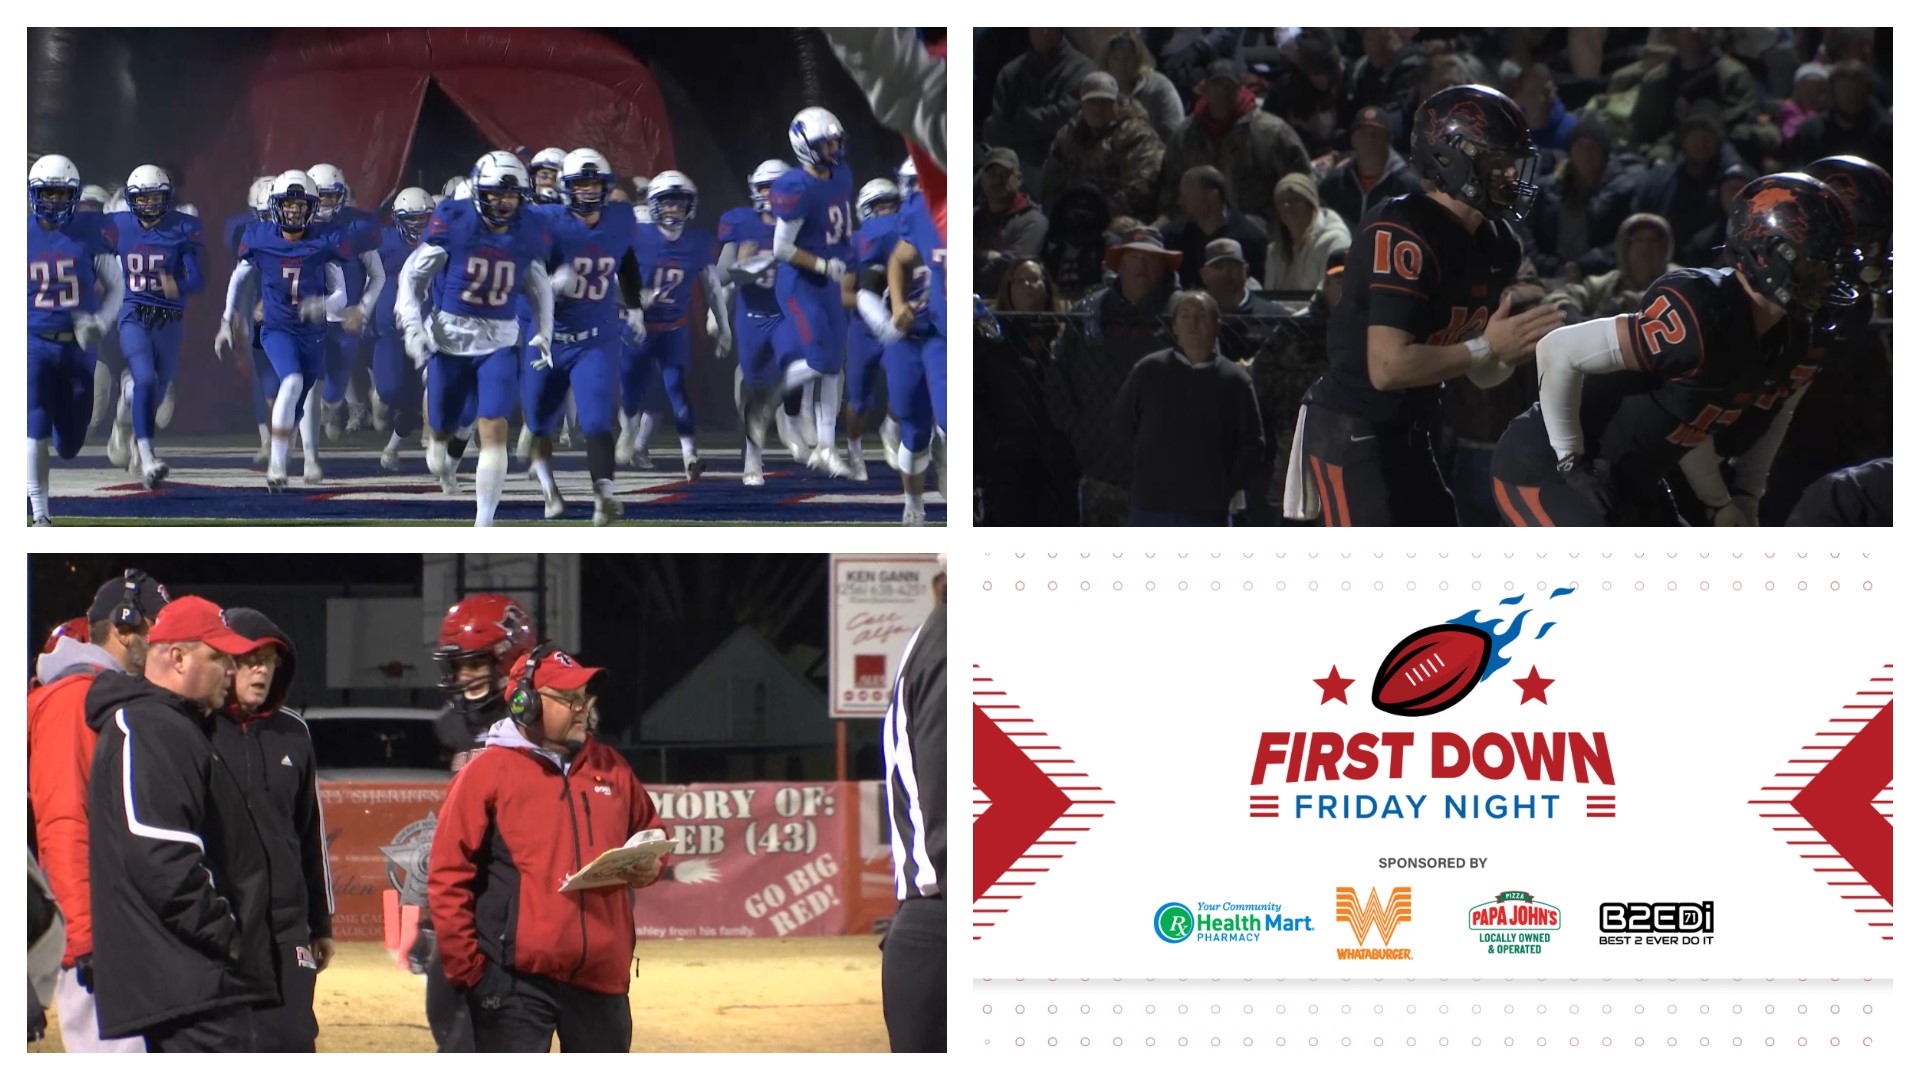 Five Tennessee Valley area teams tried to punch a ticket to the semifinals of the AHSAA Playoffs. Mo Carte provided scores & highlights from First Down Friday Night